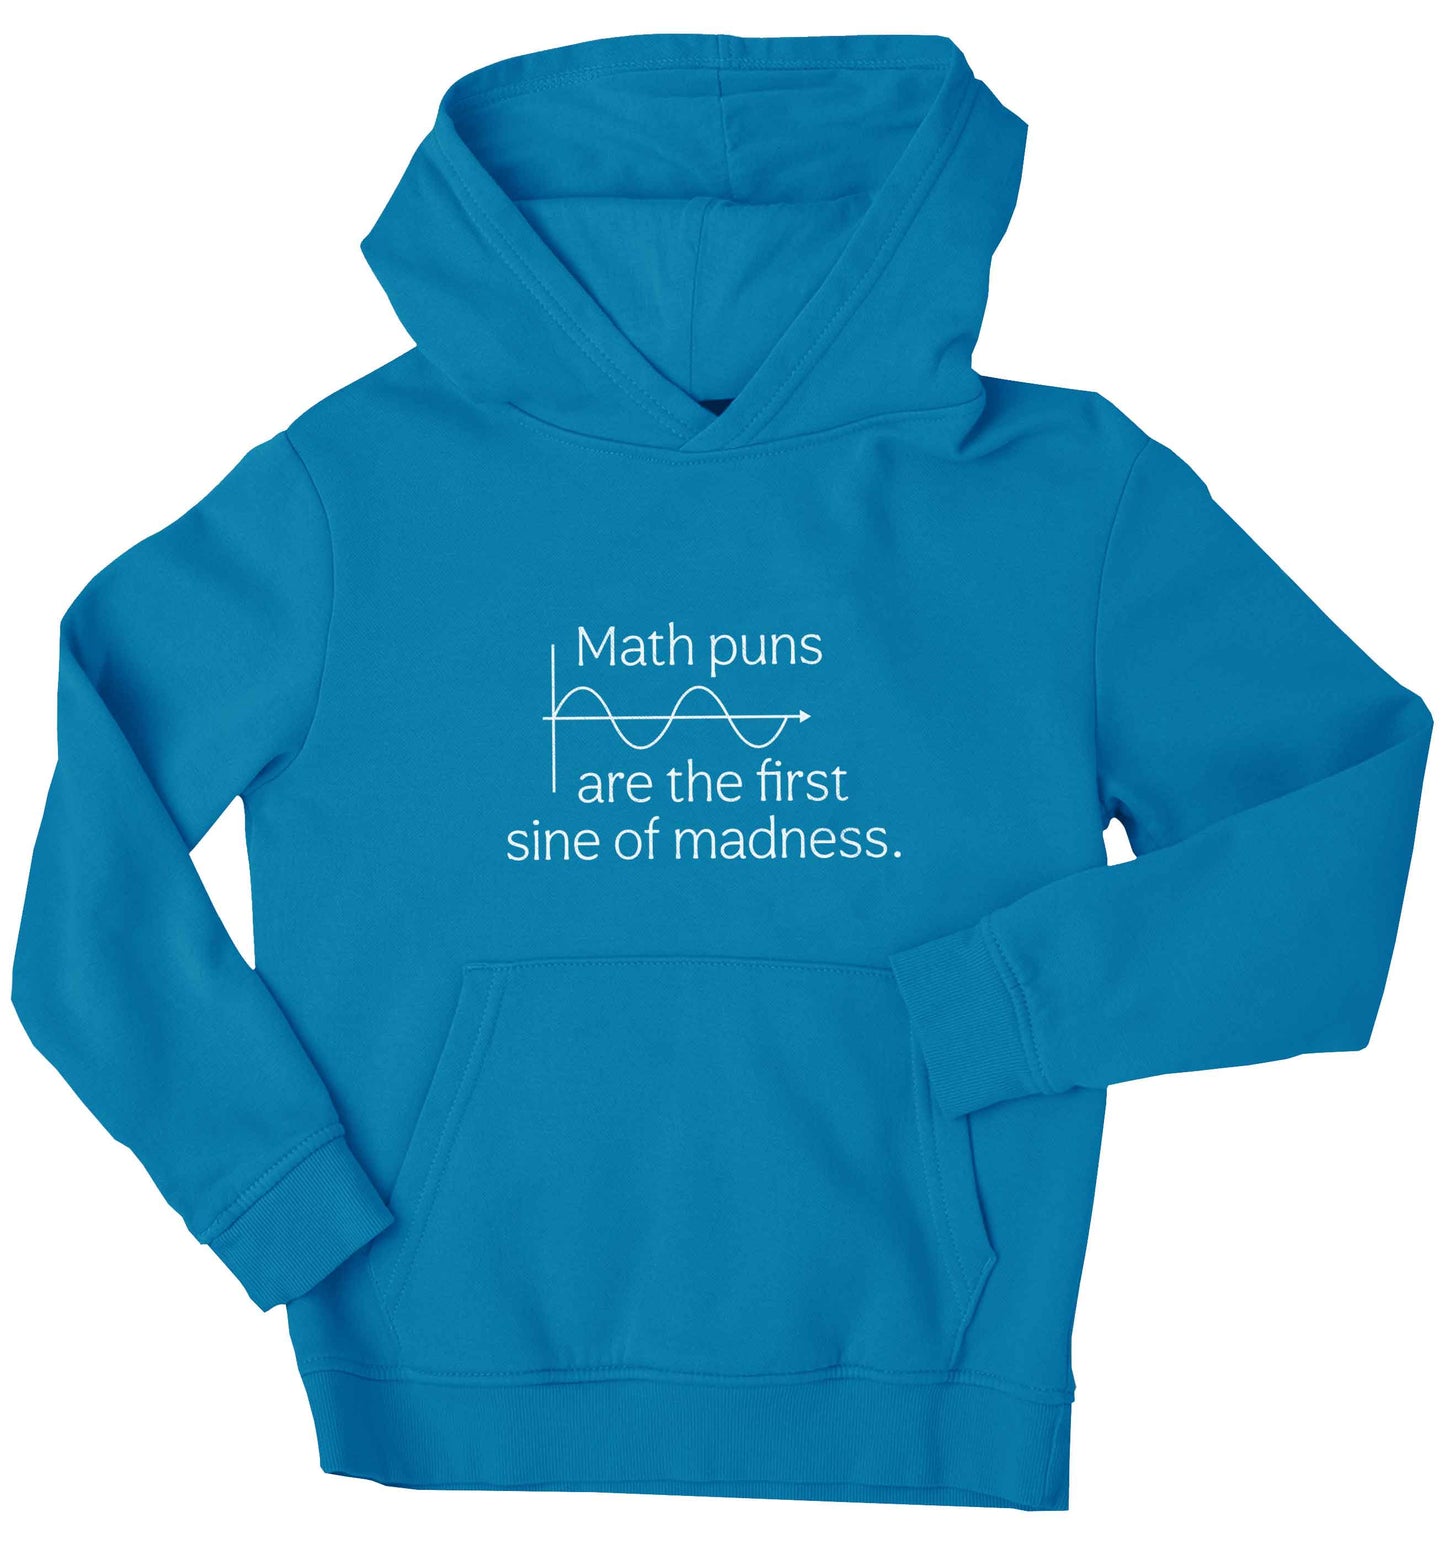 Math puns are the first sine of madness children's blue hoodie 12-13 Years